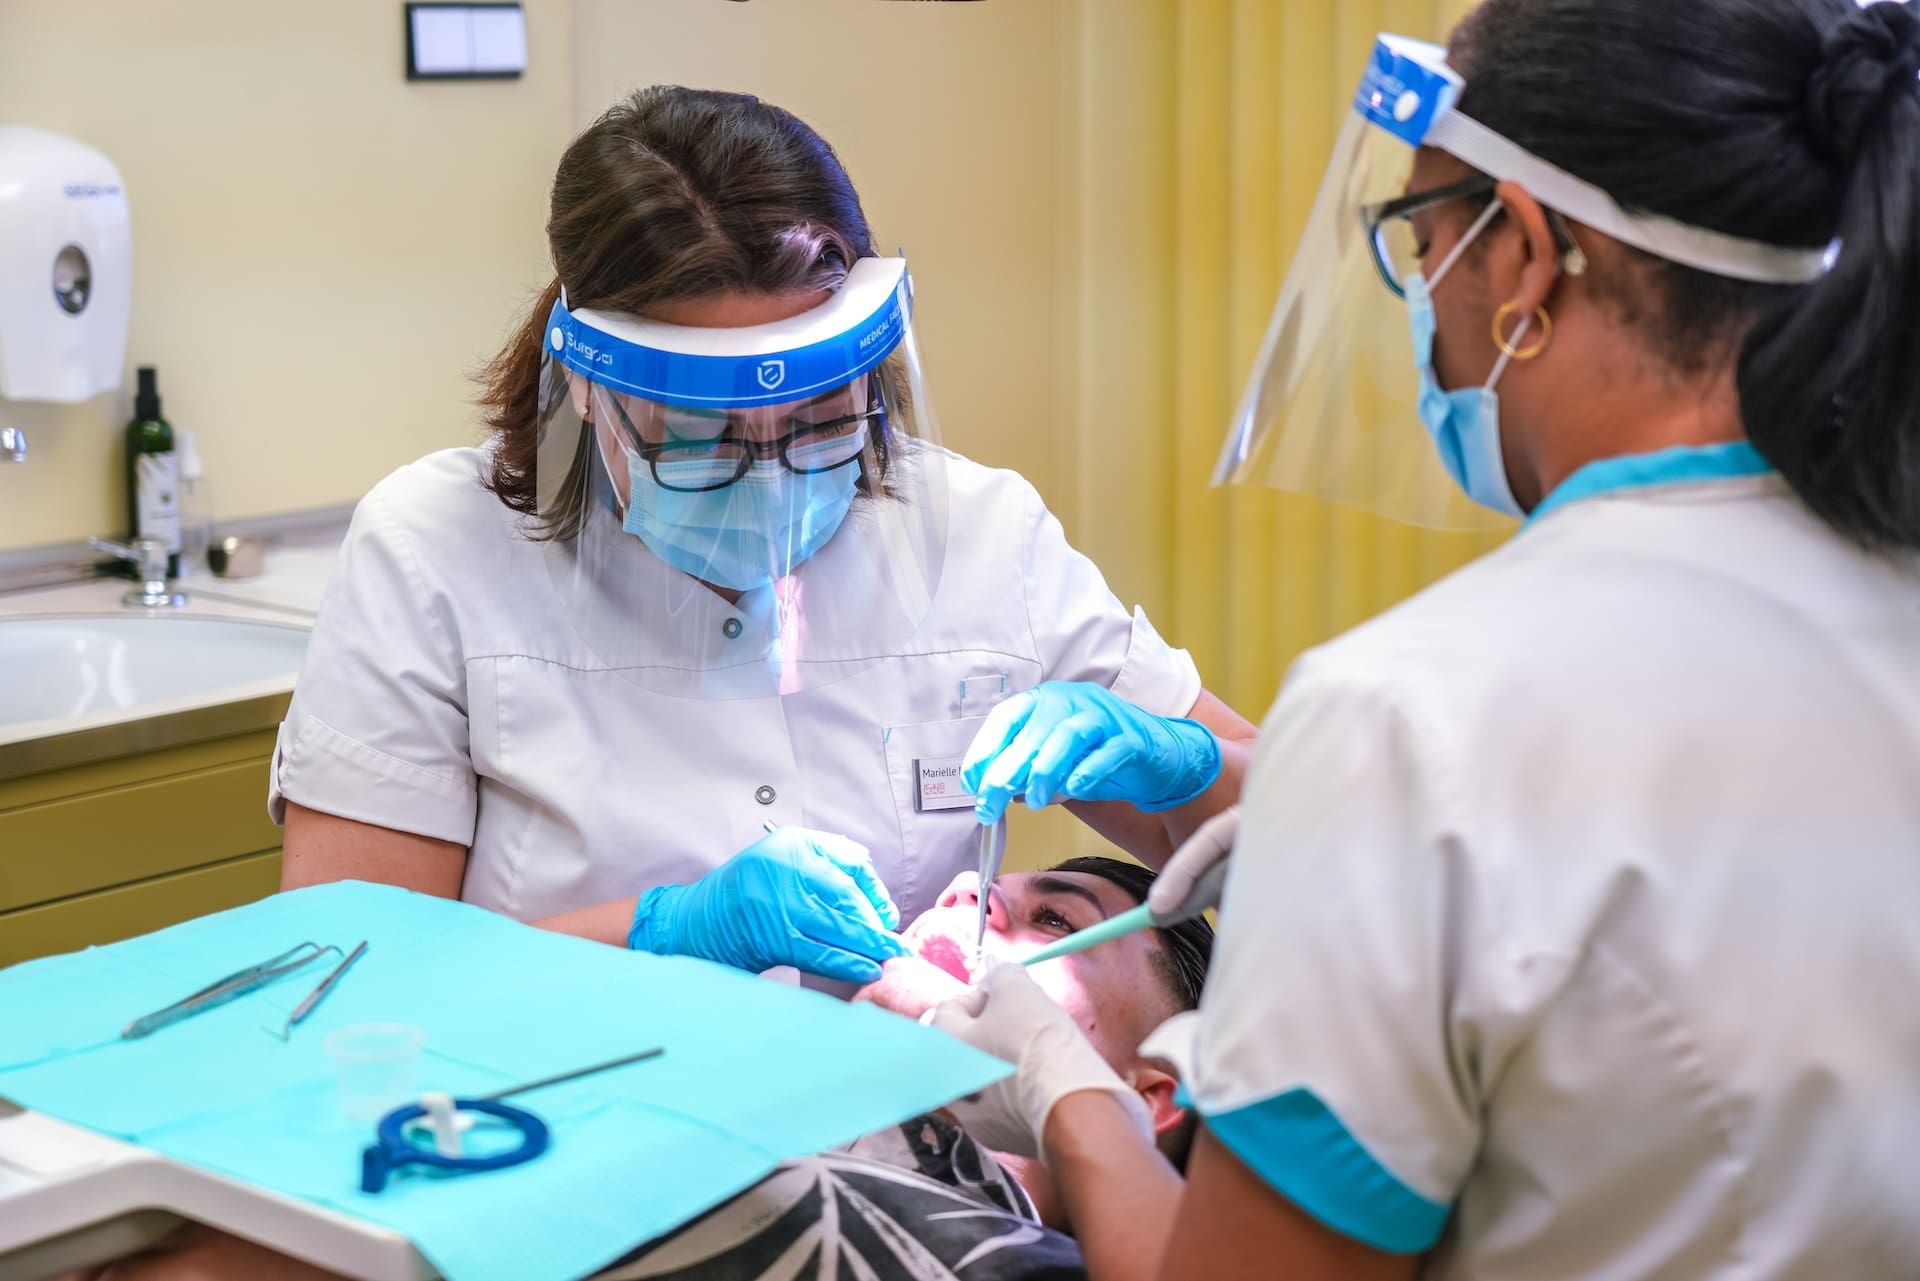 Two dentists providing sophisticated treatment to the patient.